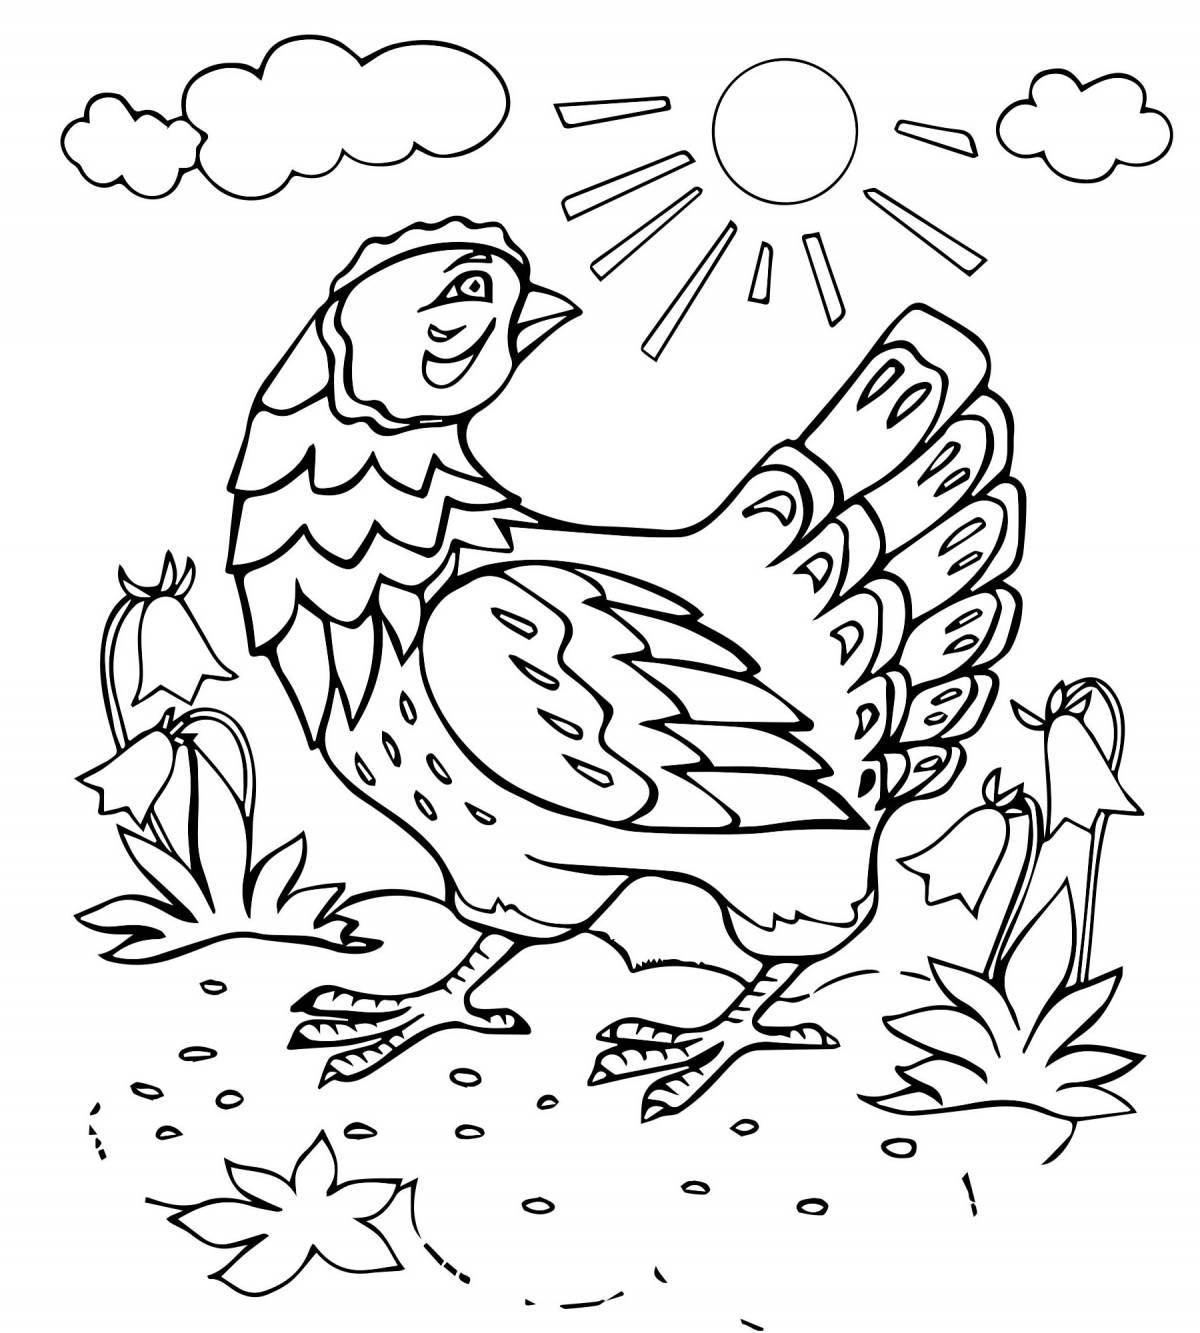 Adorable chick pockmarked coloring book for kids